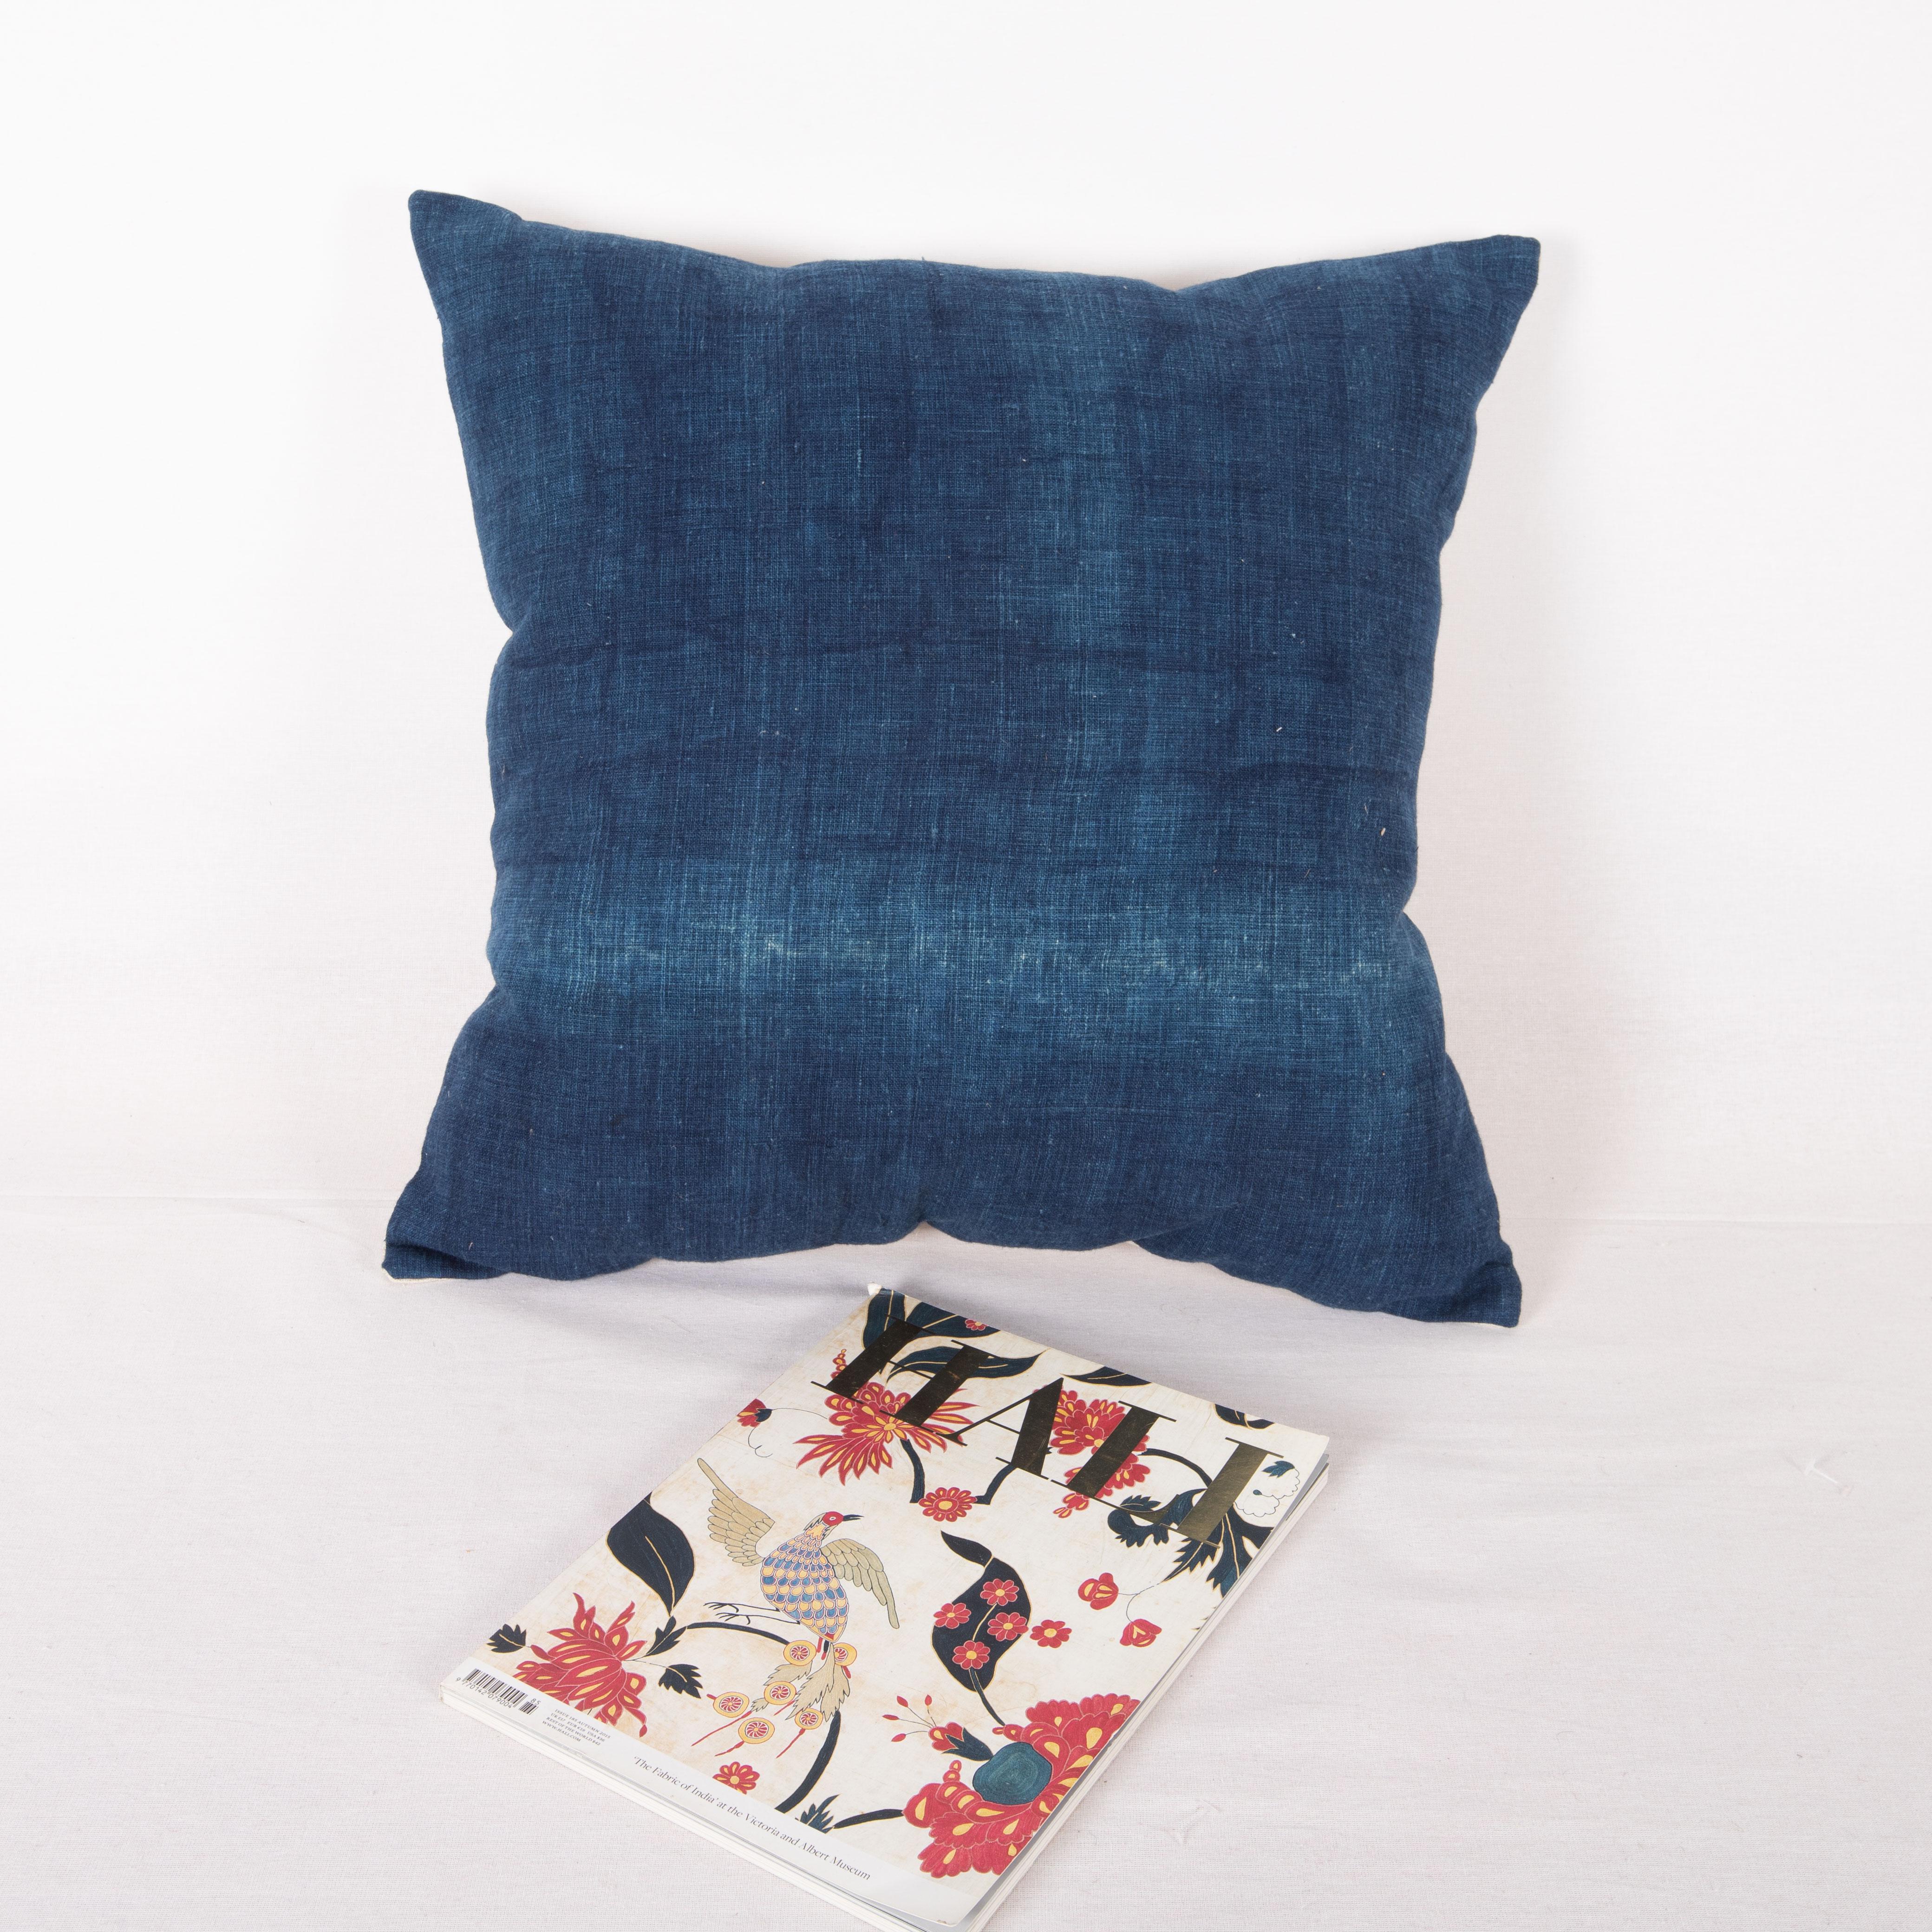 20th Century Antique Indigo Pillow Cover Made from a Quilt Top, Early 20th C. Turkey For Sale